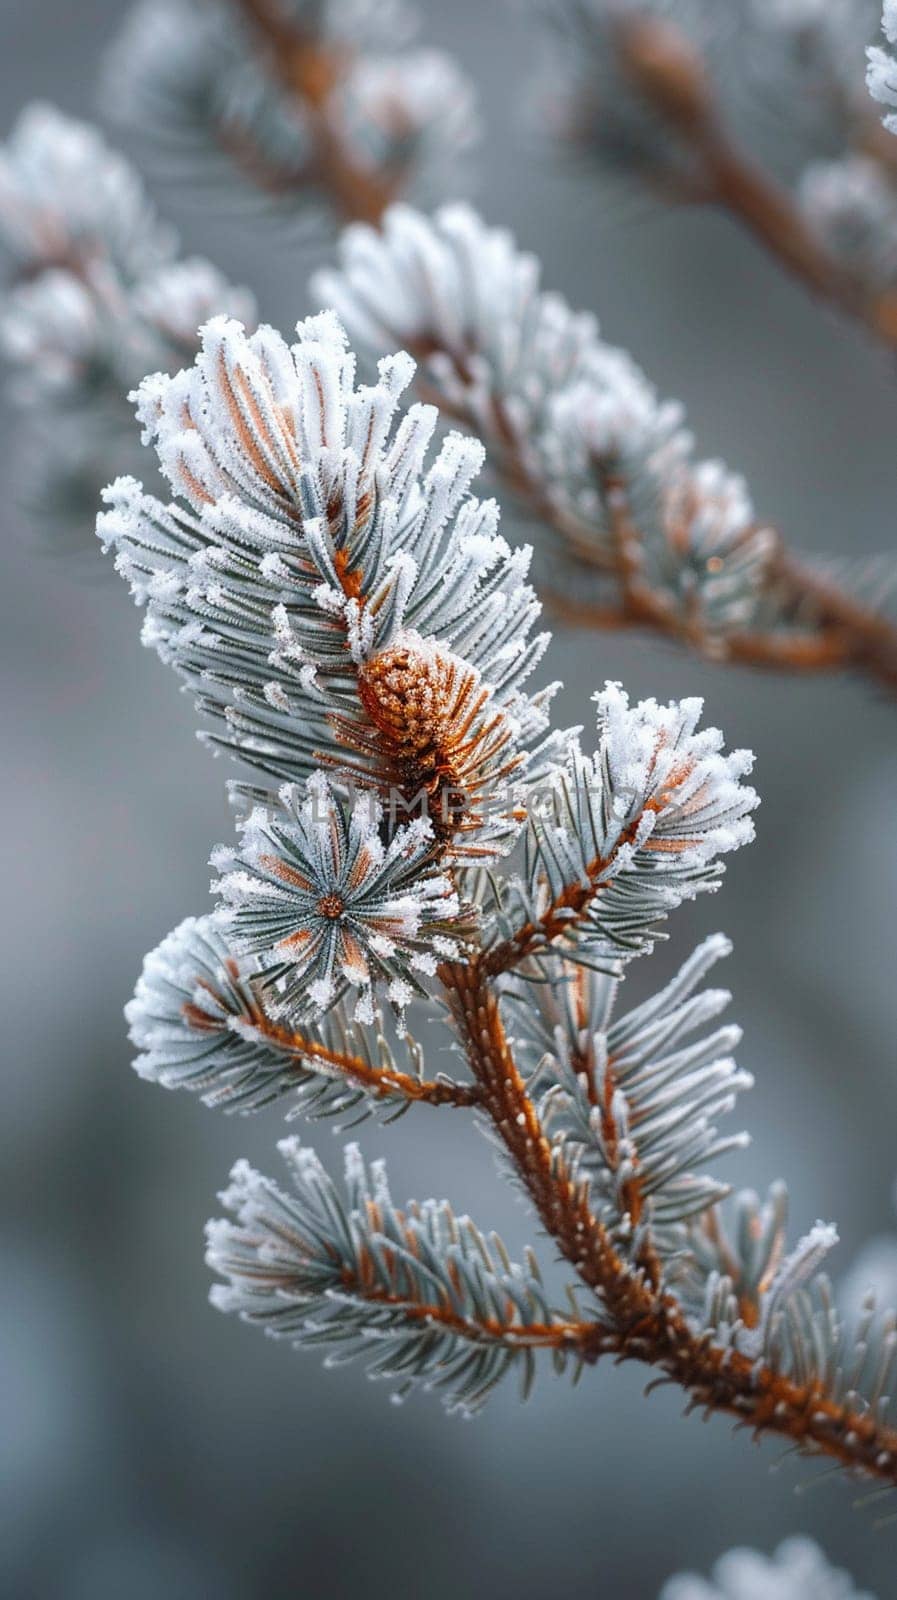 Freshly fallen snow on a pine branch by Benzoix